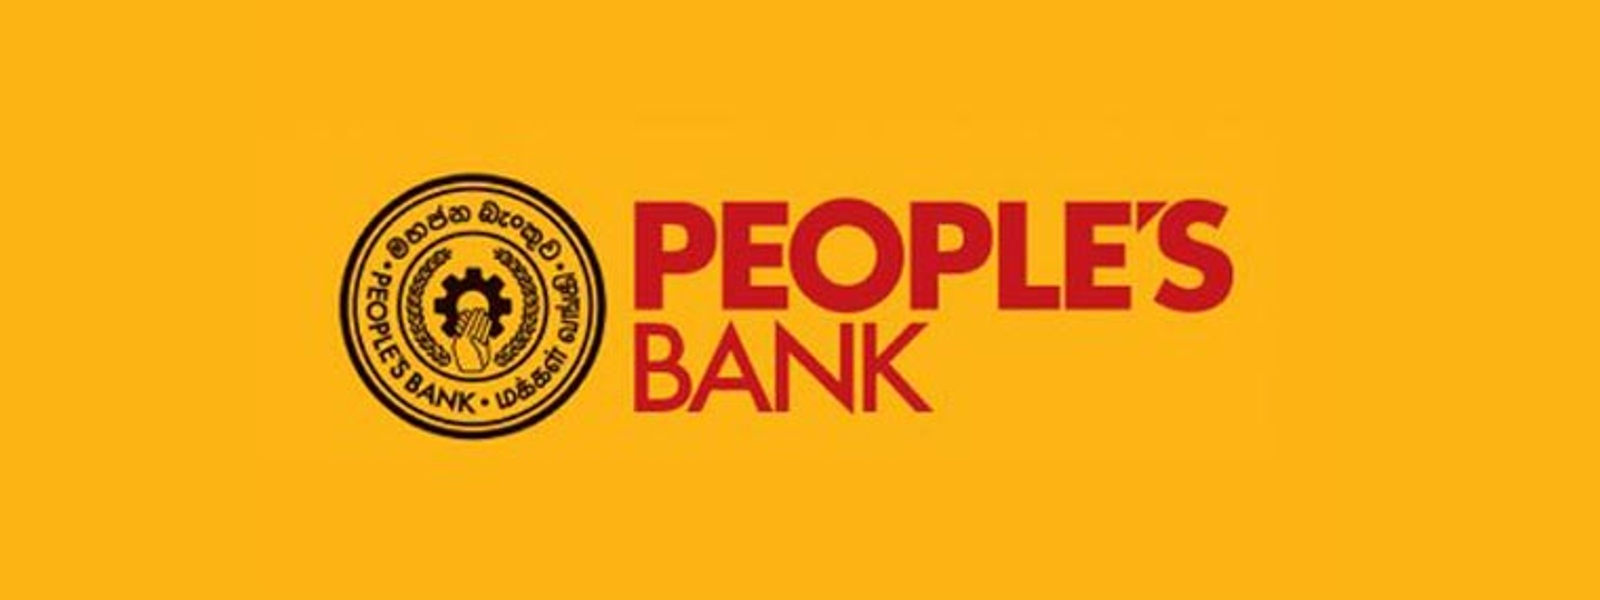 People's Bank says NO request to close accounts